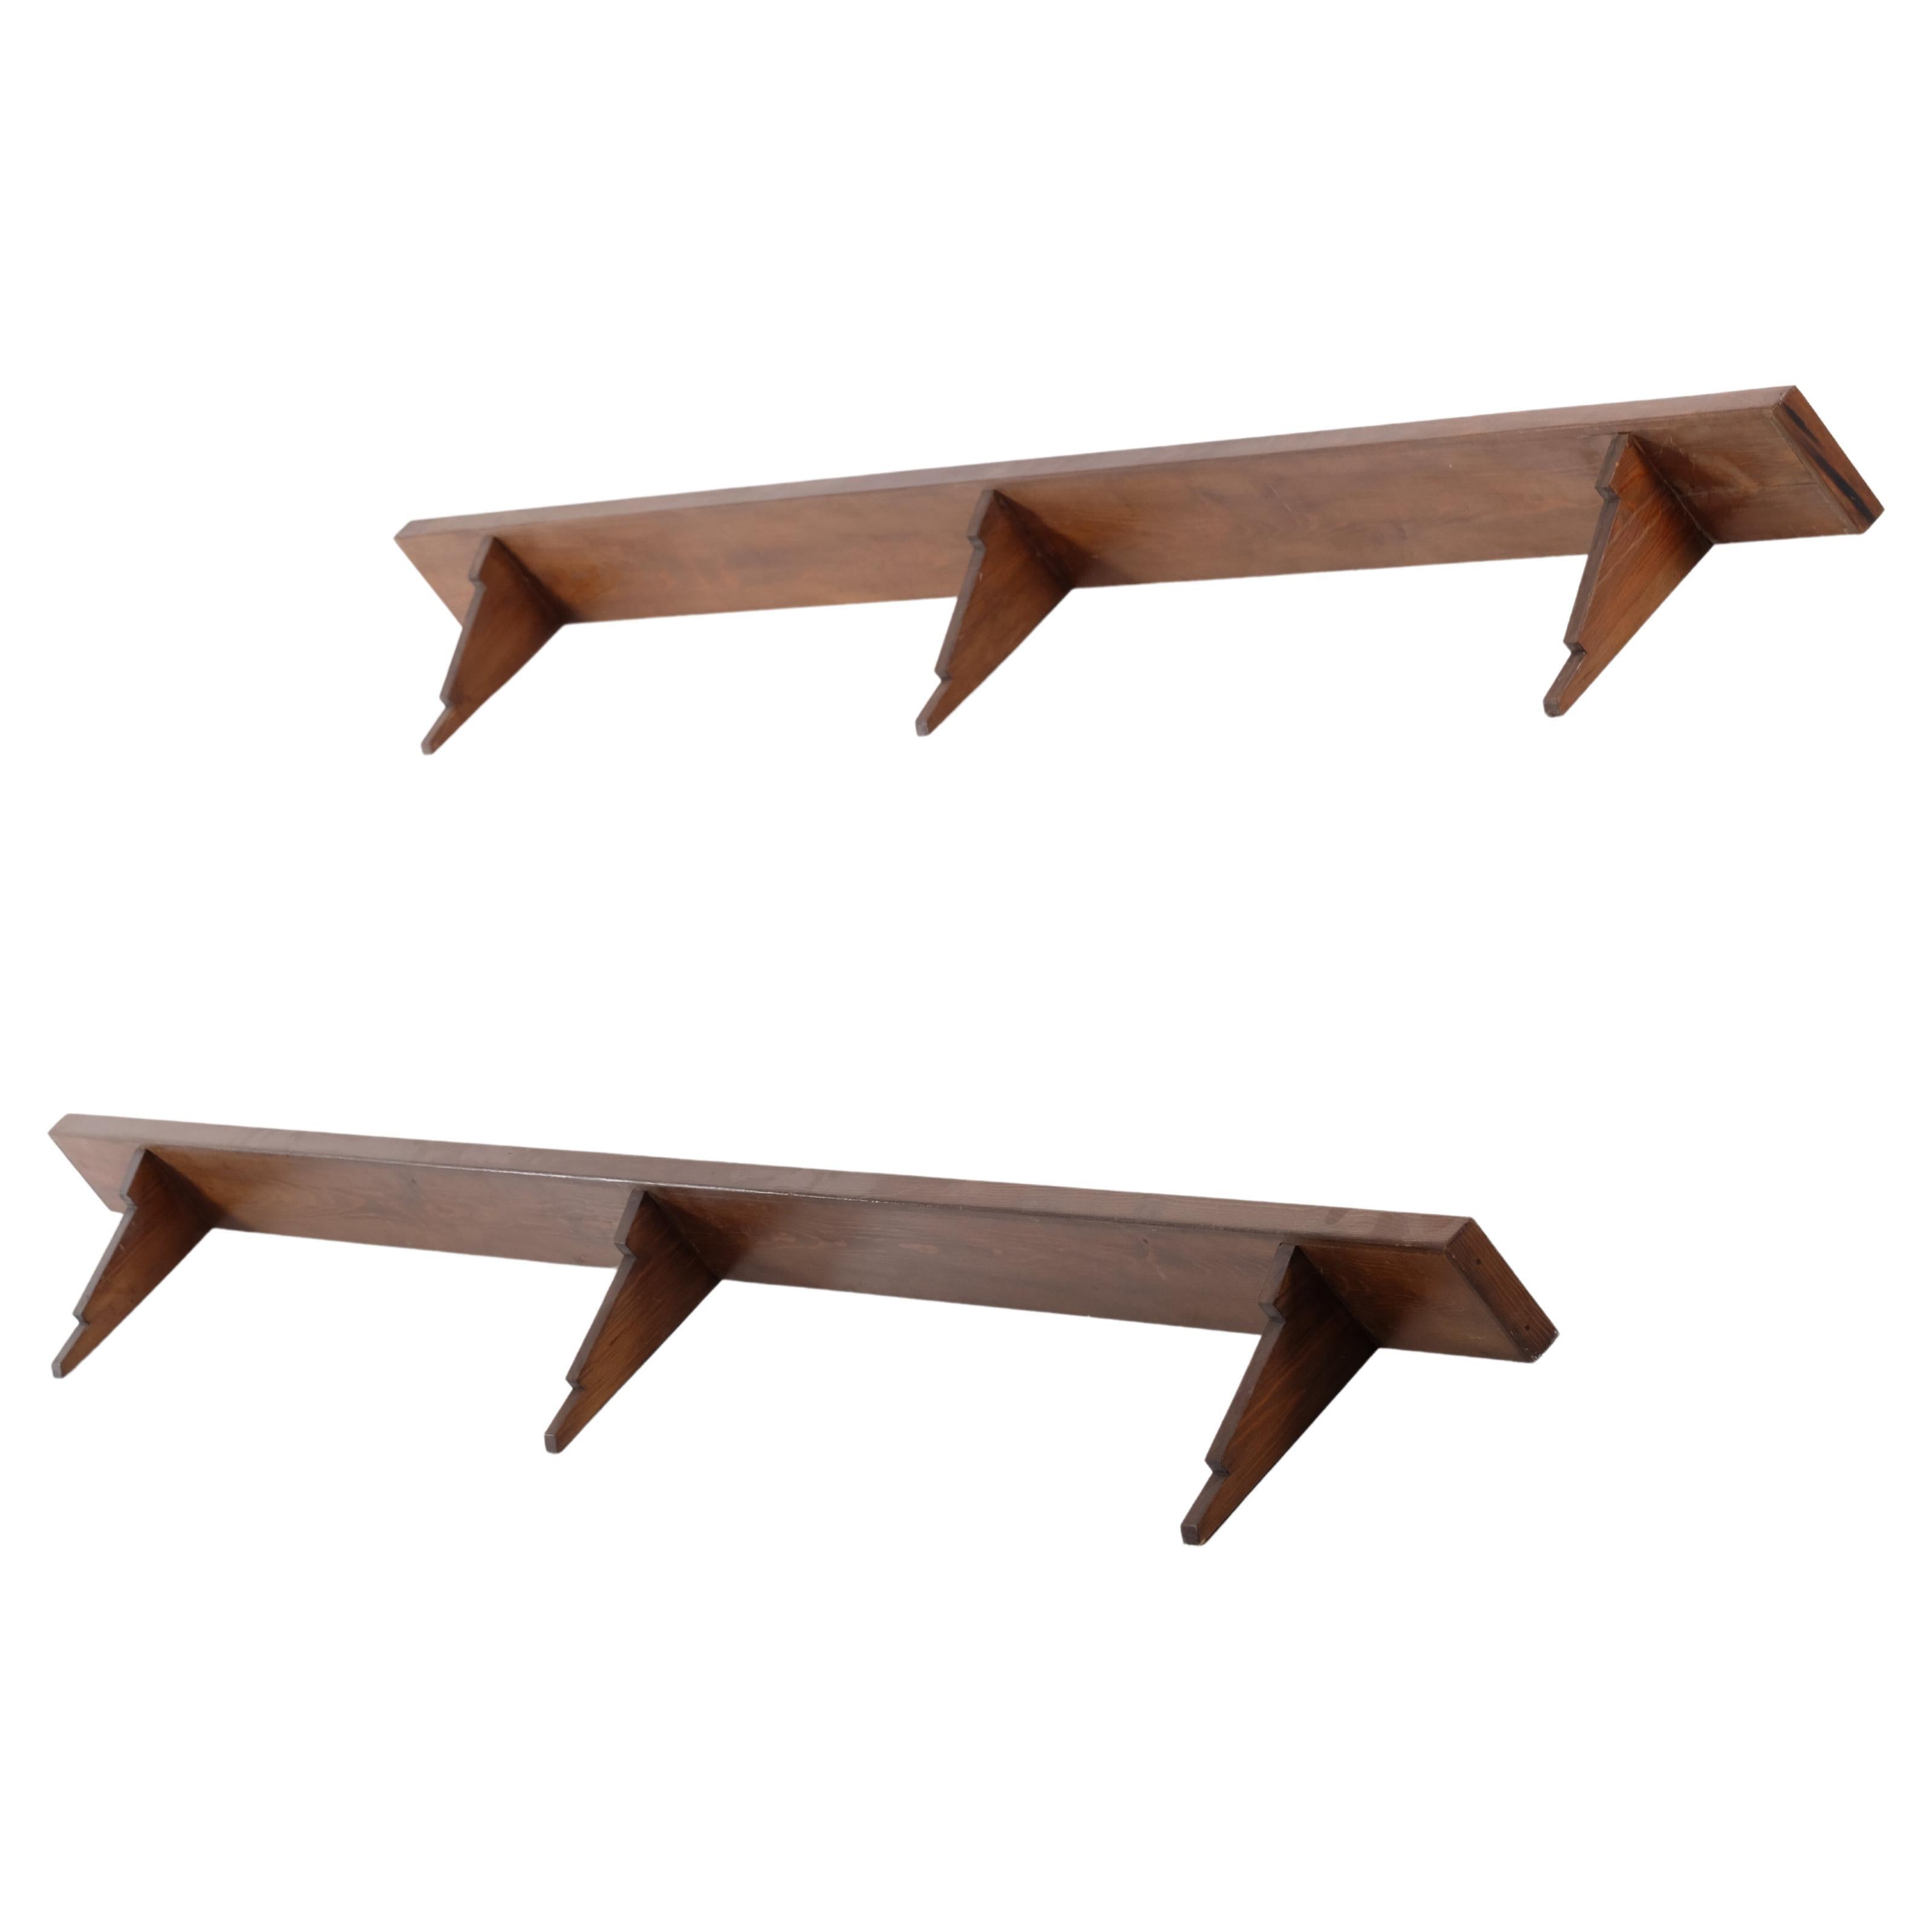 Rare pair of pine wall shelves, Sweden, 1930s For Sale 4